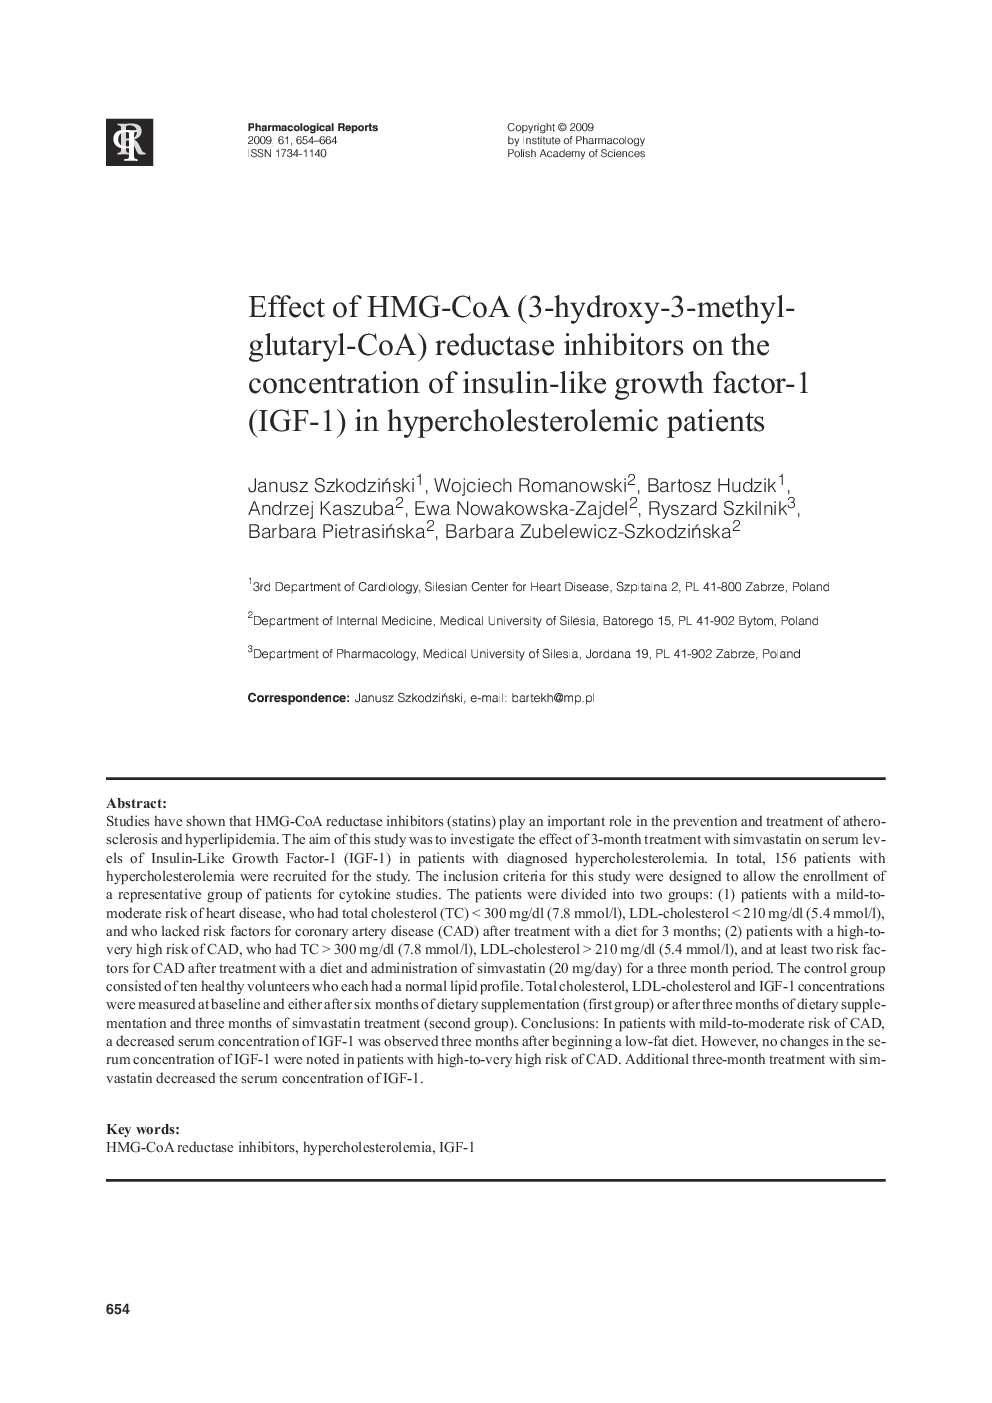 Effect of HMG-CoA (3-hydroxy-3-methyl-glutaryl-CoA) reductase inhibitors on the concentration of insulin-like growth factor-1 (IGF-1) in hypercholesterolemic patients